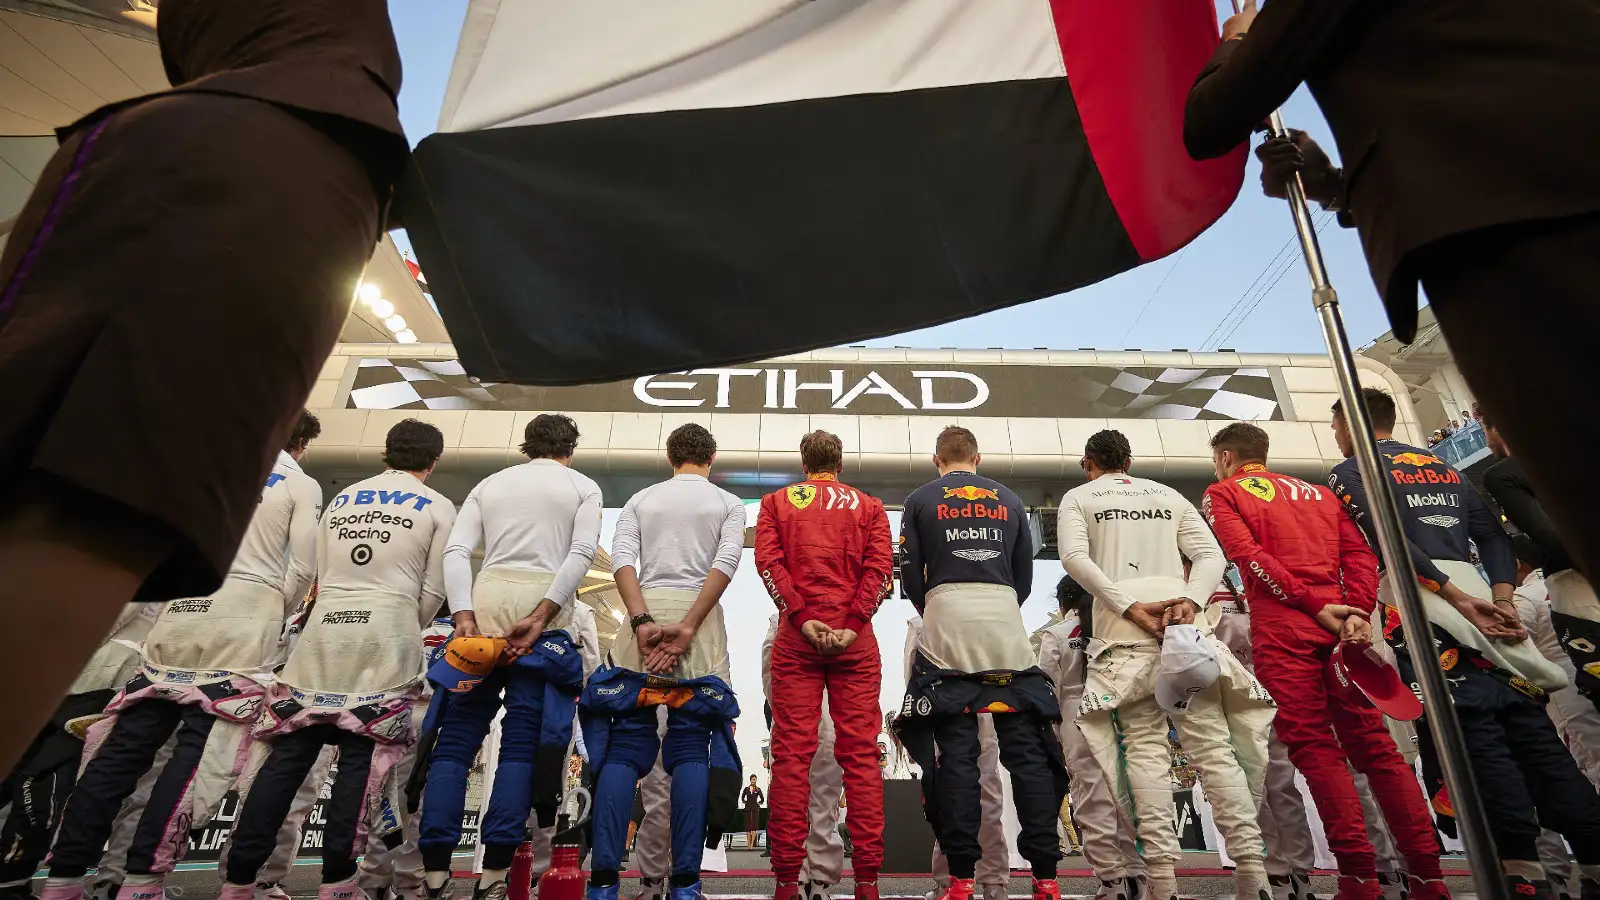 F1 drivers line up for national anthem.